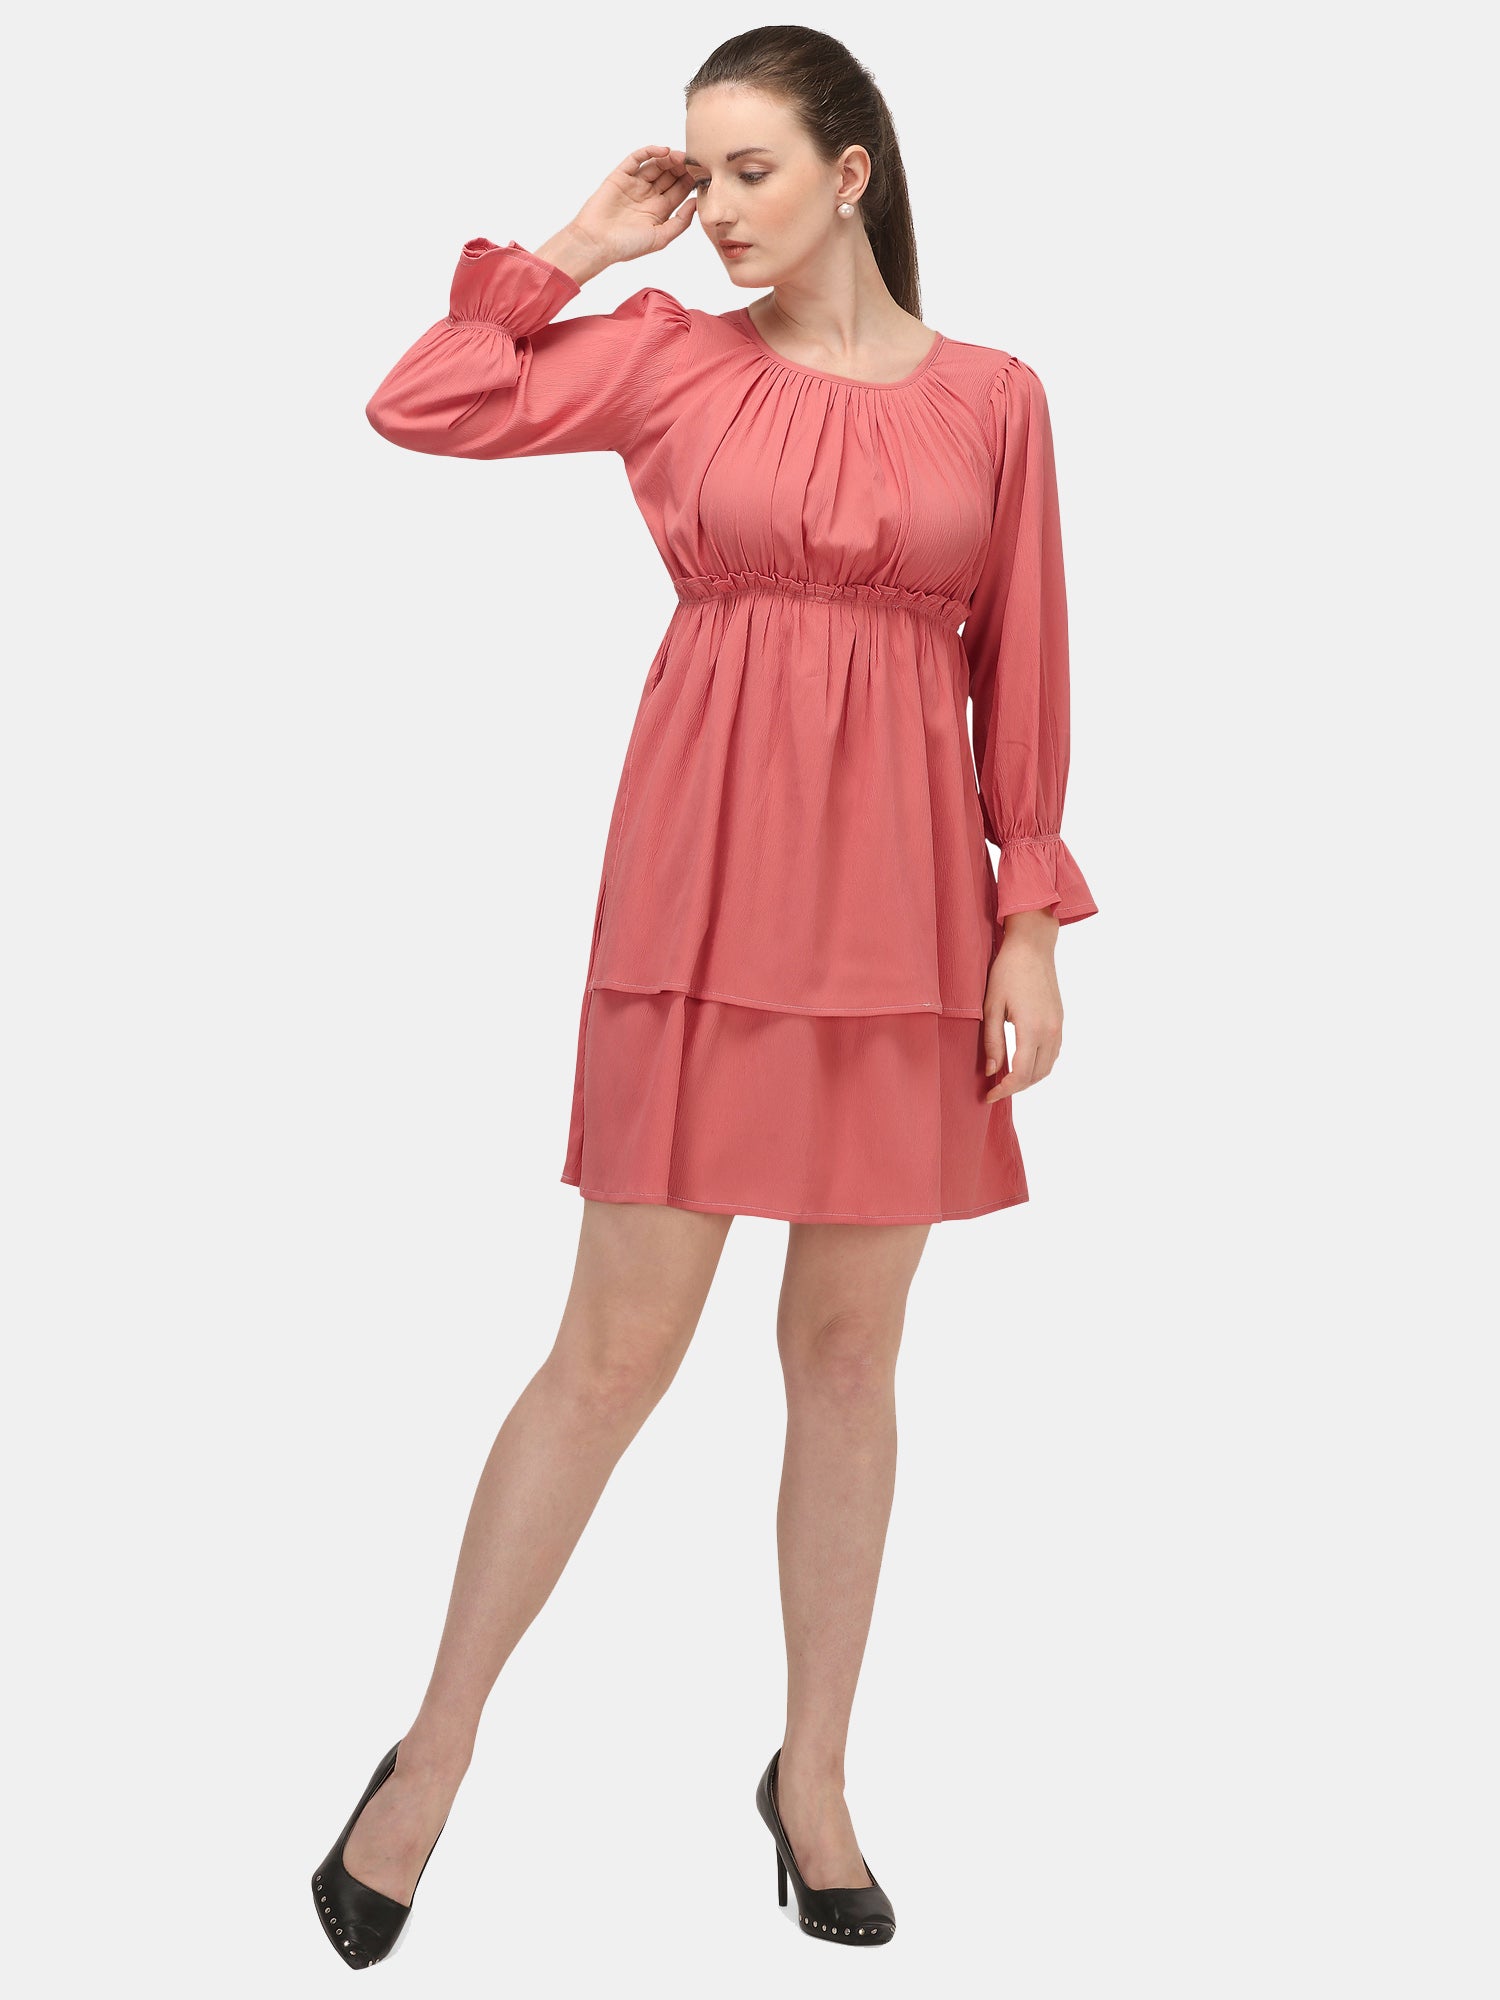 Women's Baby Pink Front Pleated Knee Length Tunic Dress - MESMORA FASHIONS